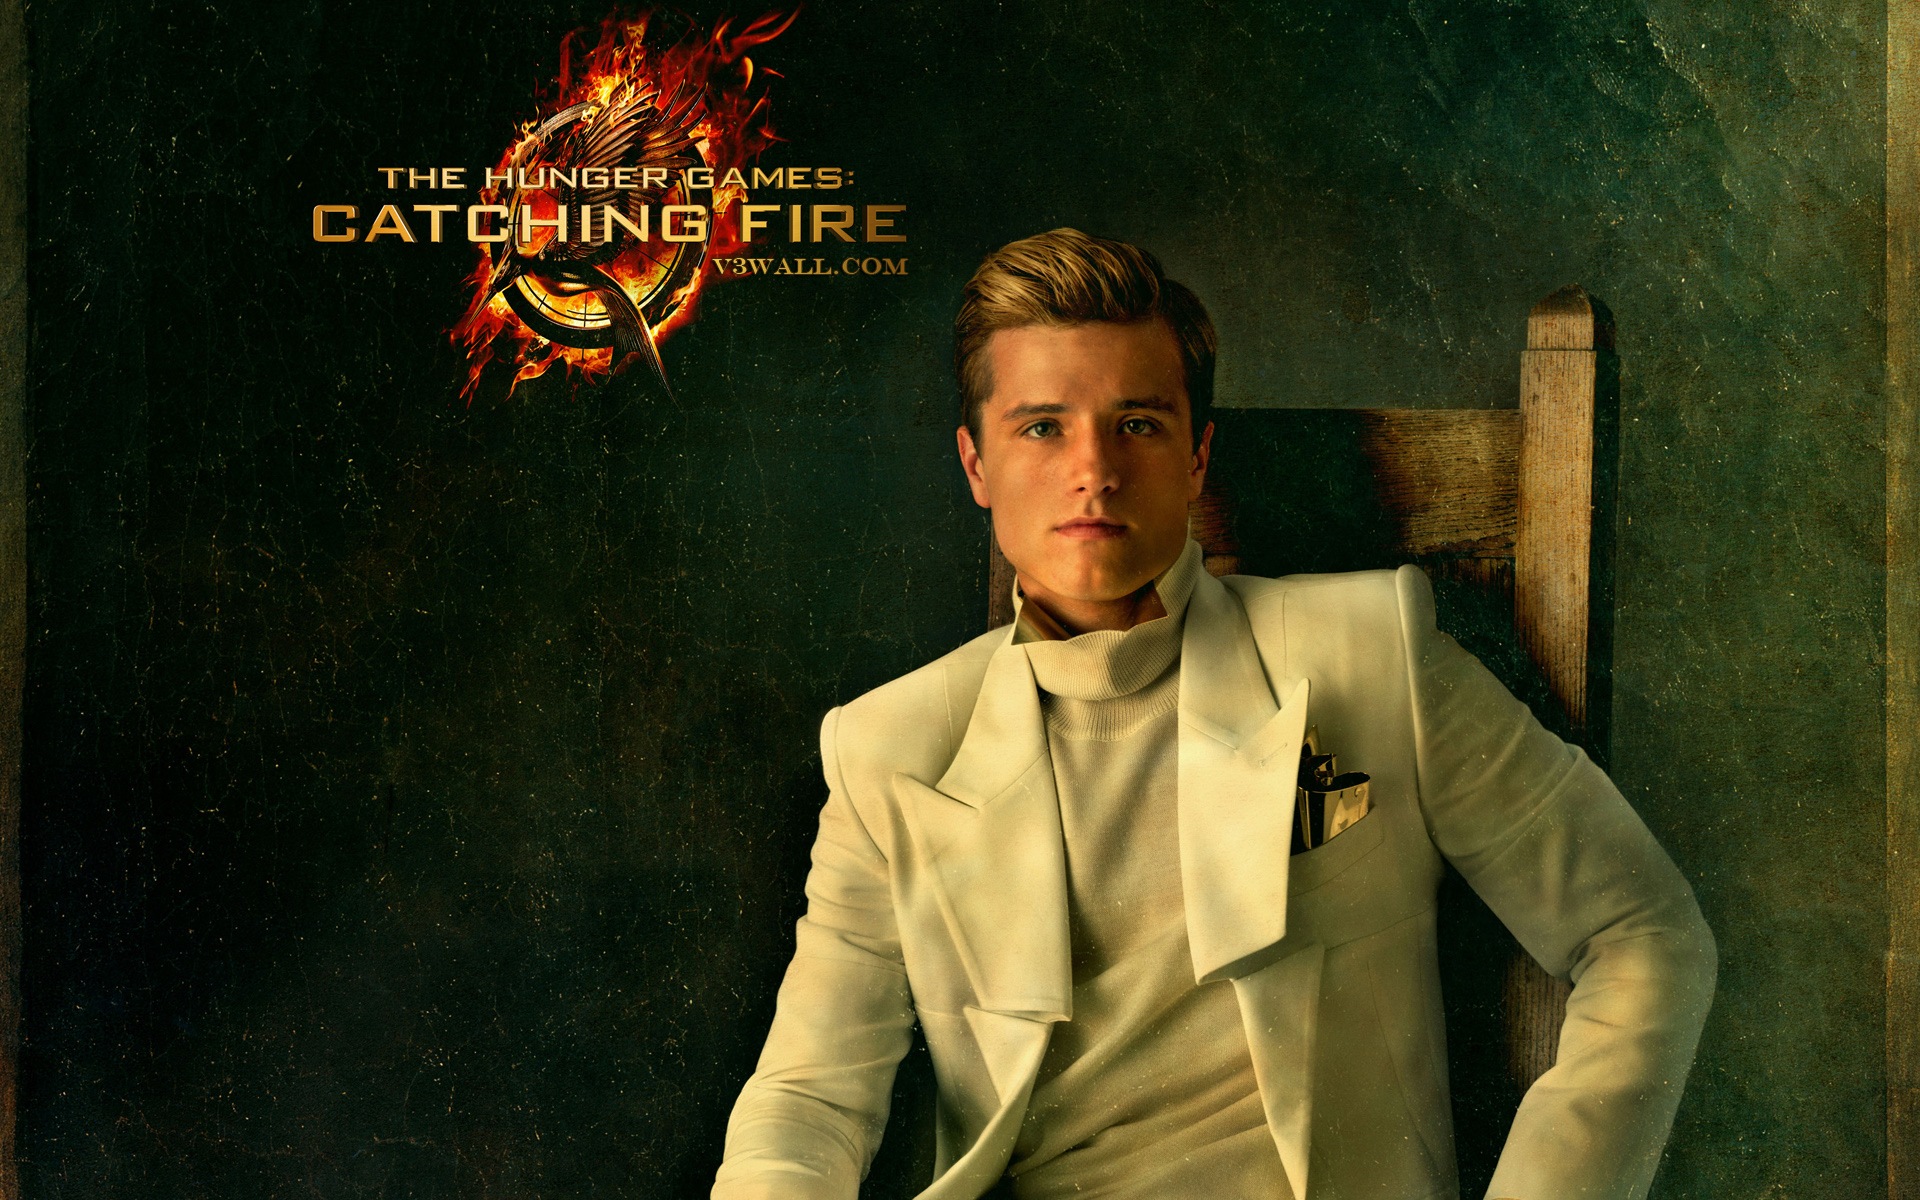 The Hunger Games: Catching Fire wallpapers HD #18 - 1920x1200